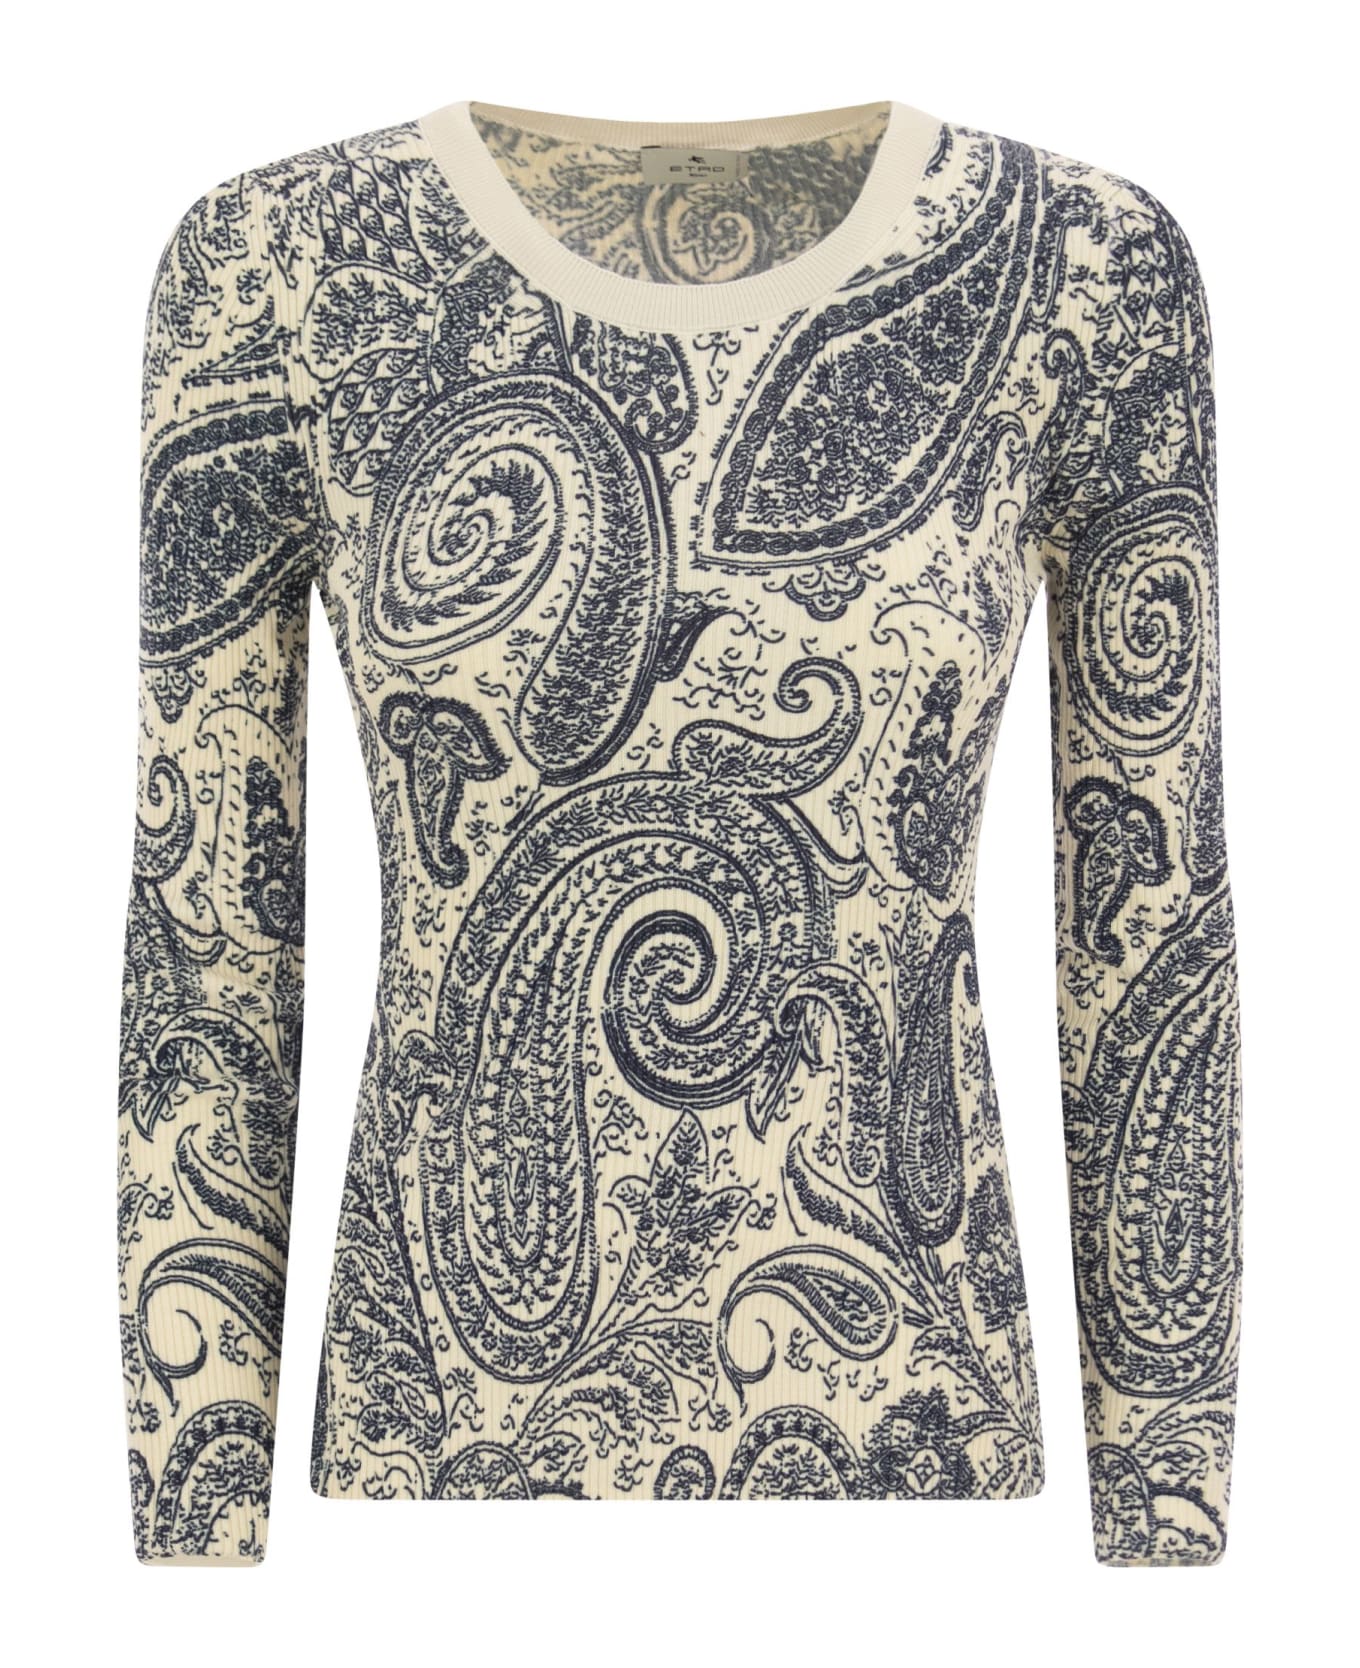 Etro Crew-neck Sweater With Paisley Pattern - Beige/blue